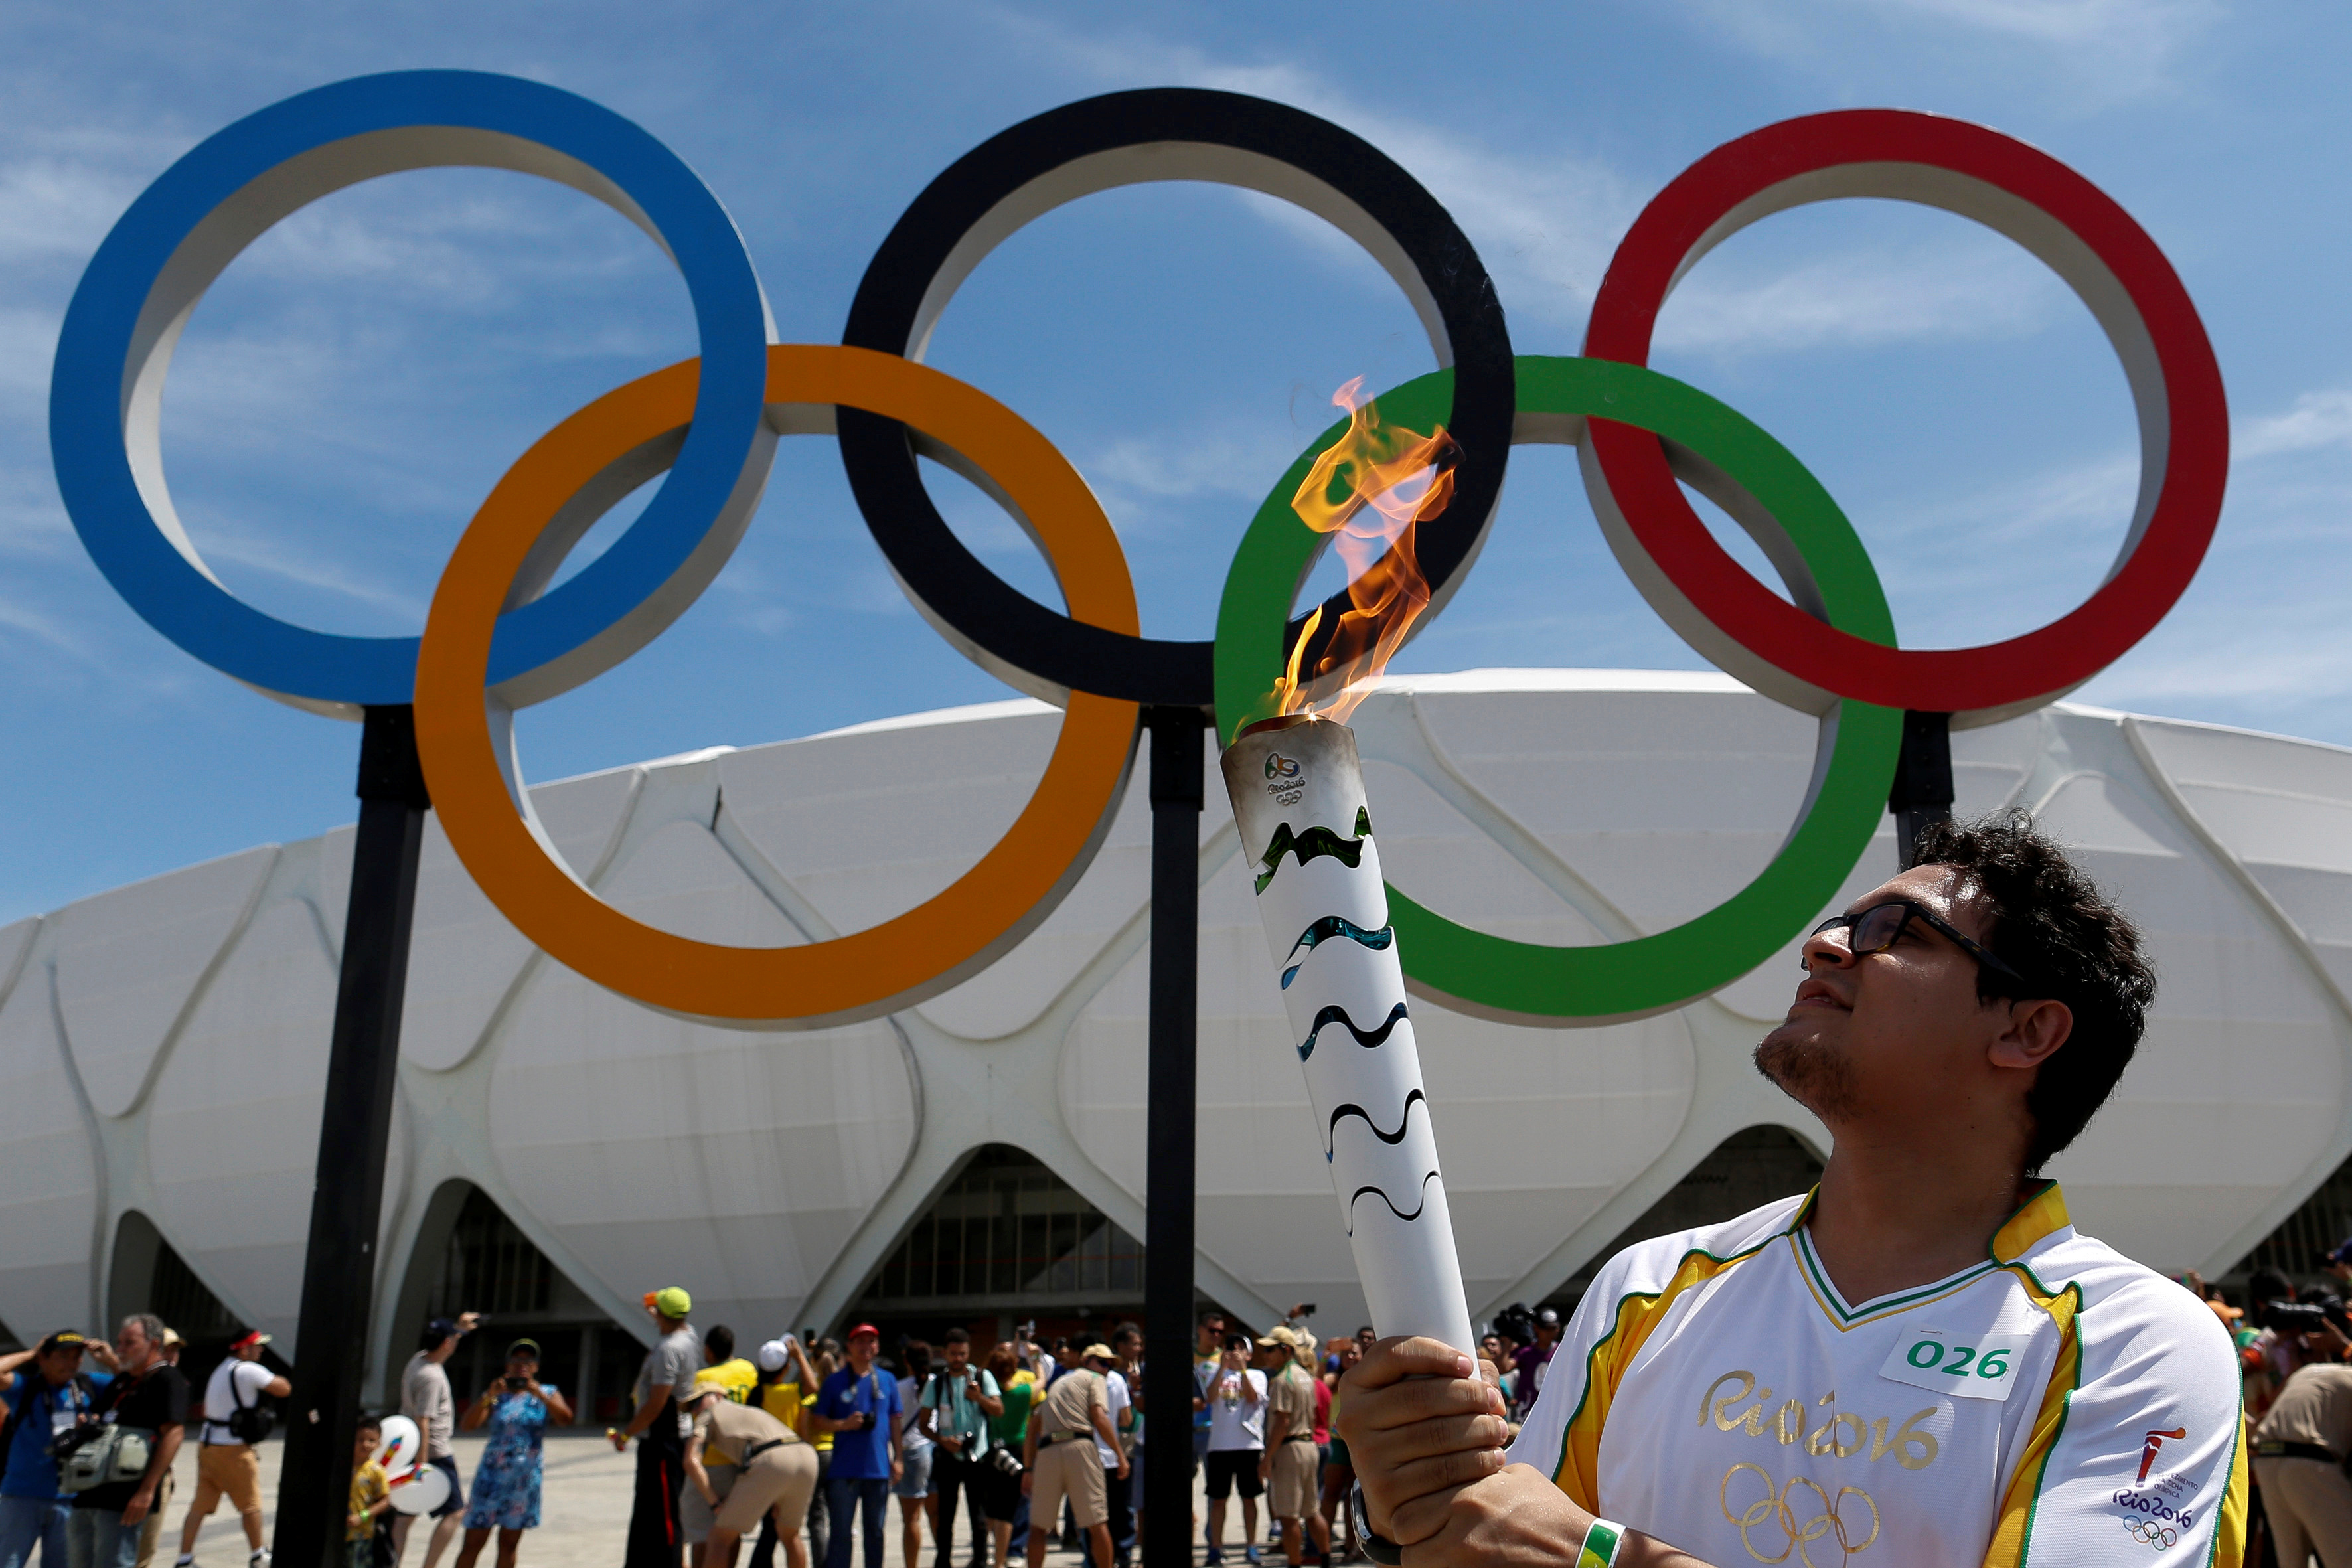 Brazilian designer Glauber Penha takes part in the Olympic Flame torch relay.